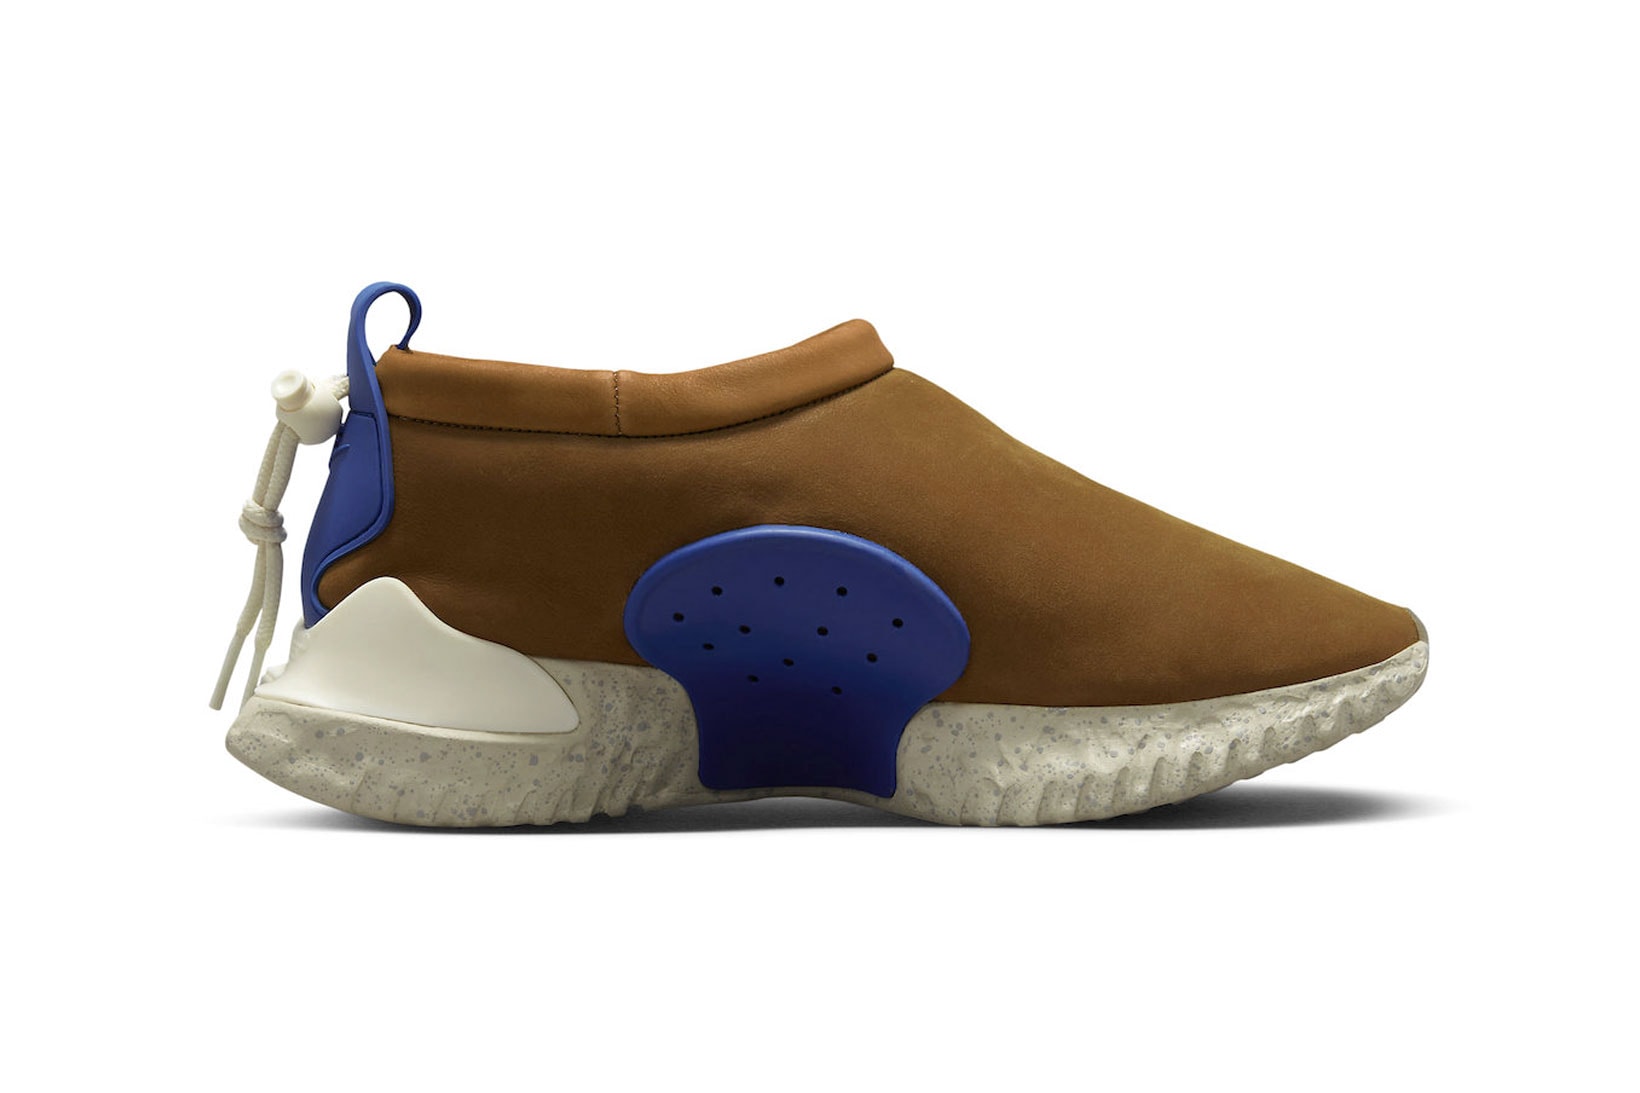 UNDERCOVER Nike Moc Flow Collaboration Jun Takahashi Black Ale Brown Team Royal Images Release Price Date 